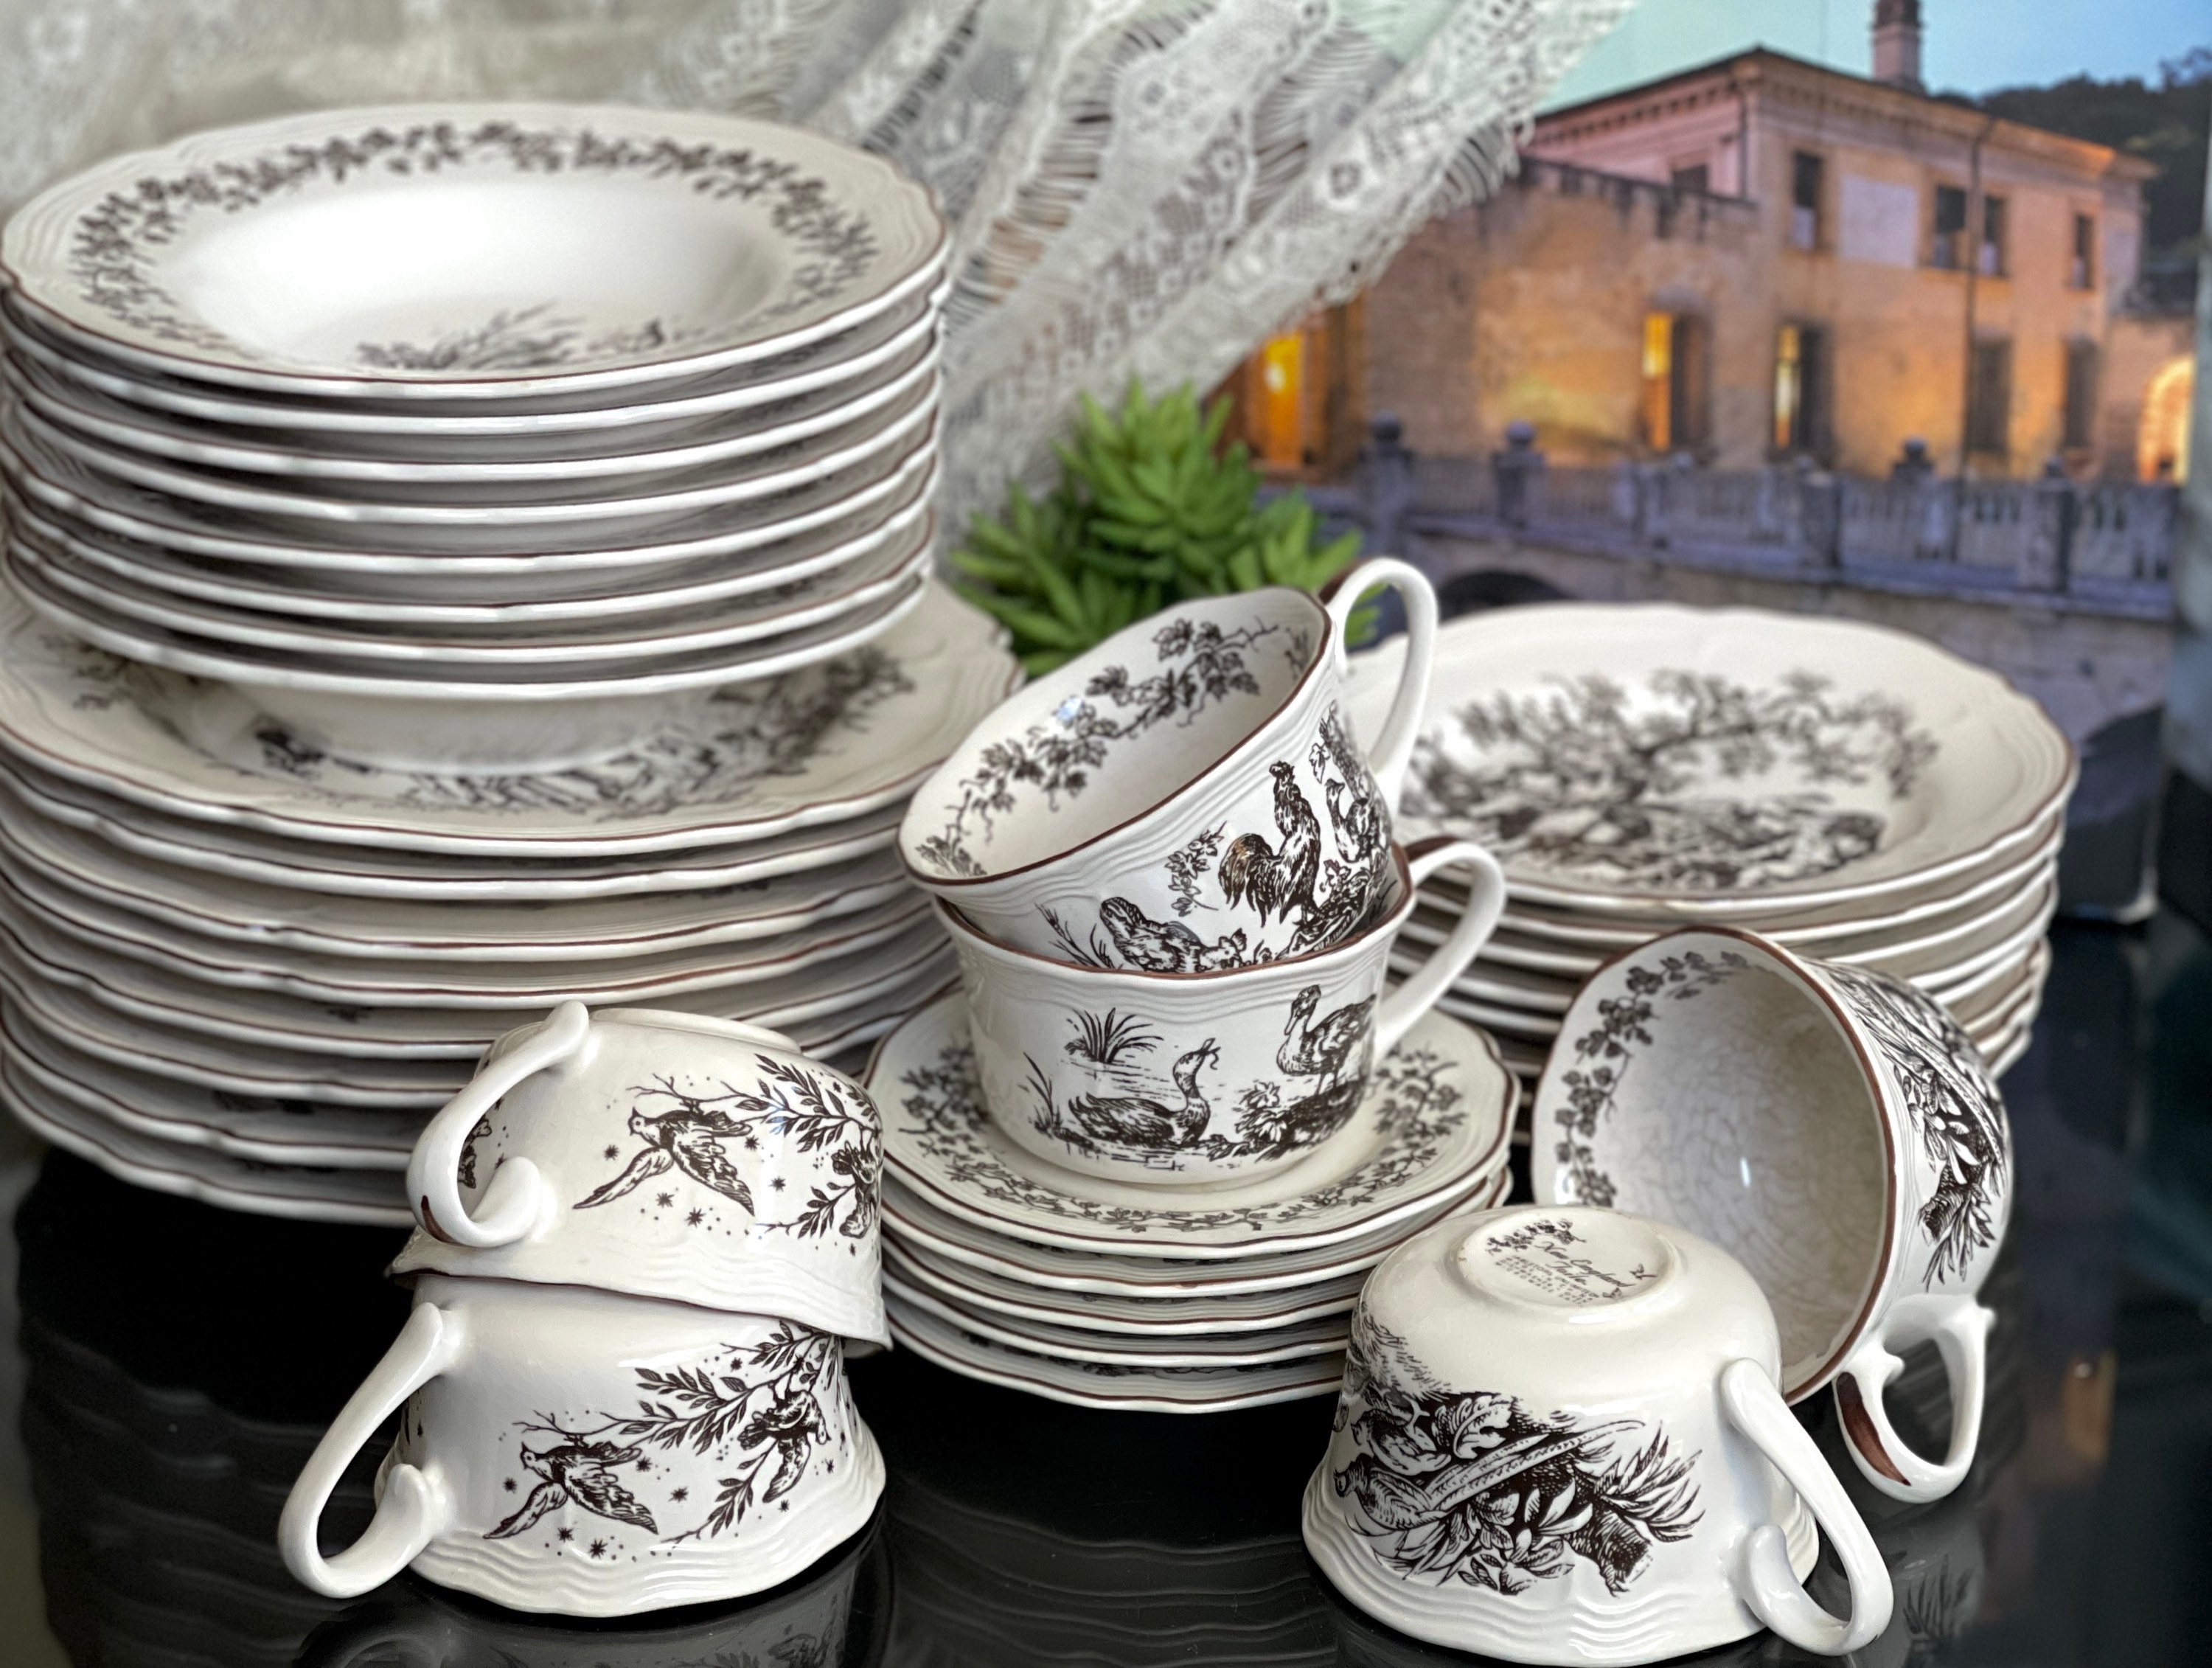 A Very Old Cooking Tradition – Rough Surfaced Spanish Plates and Bowls